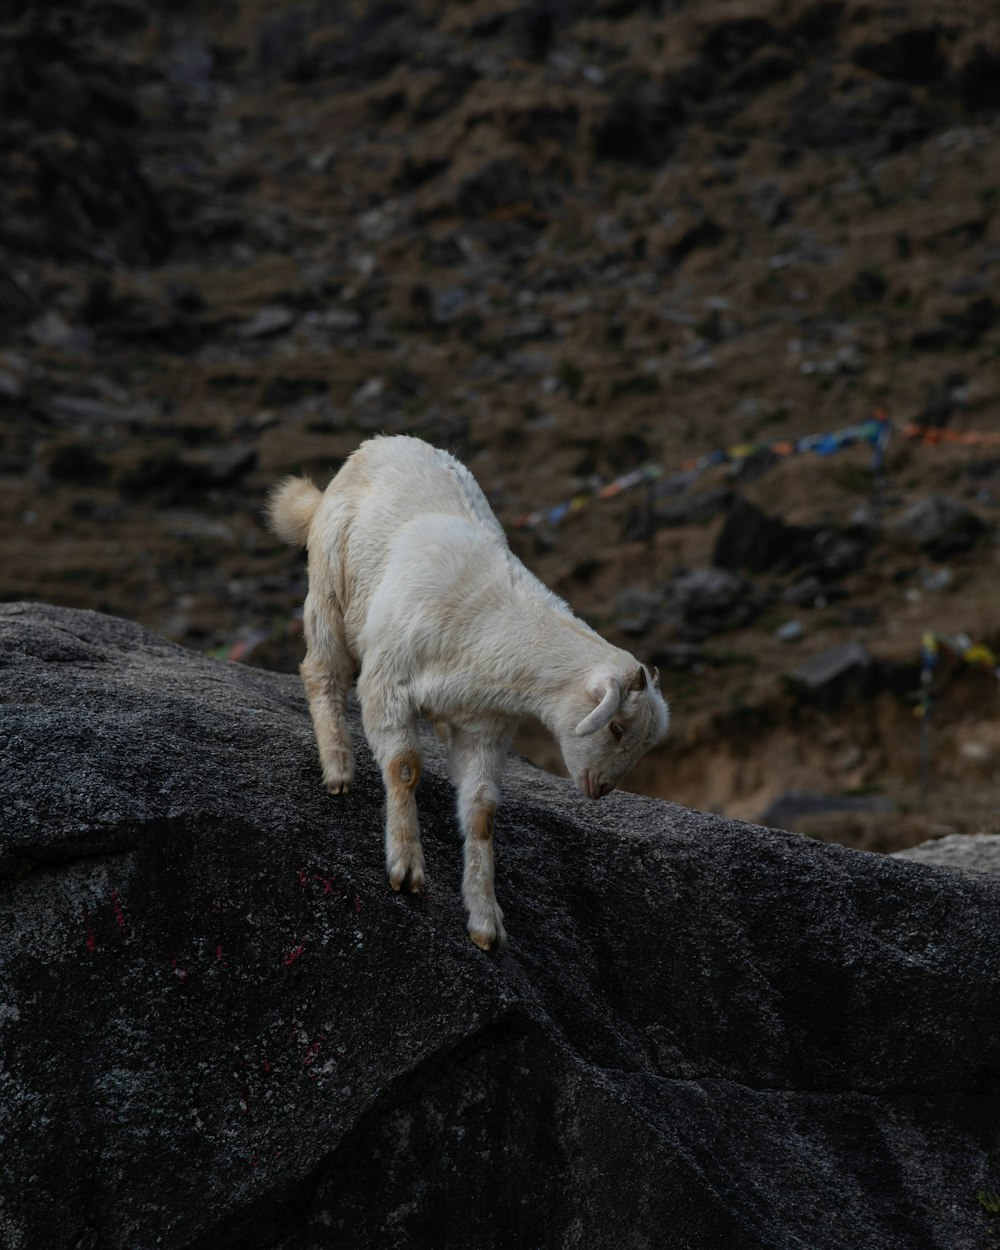 a dog standing on a rocky surface